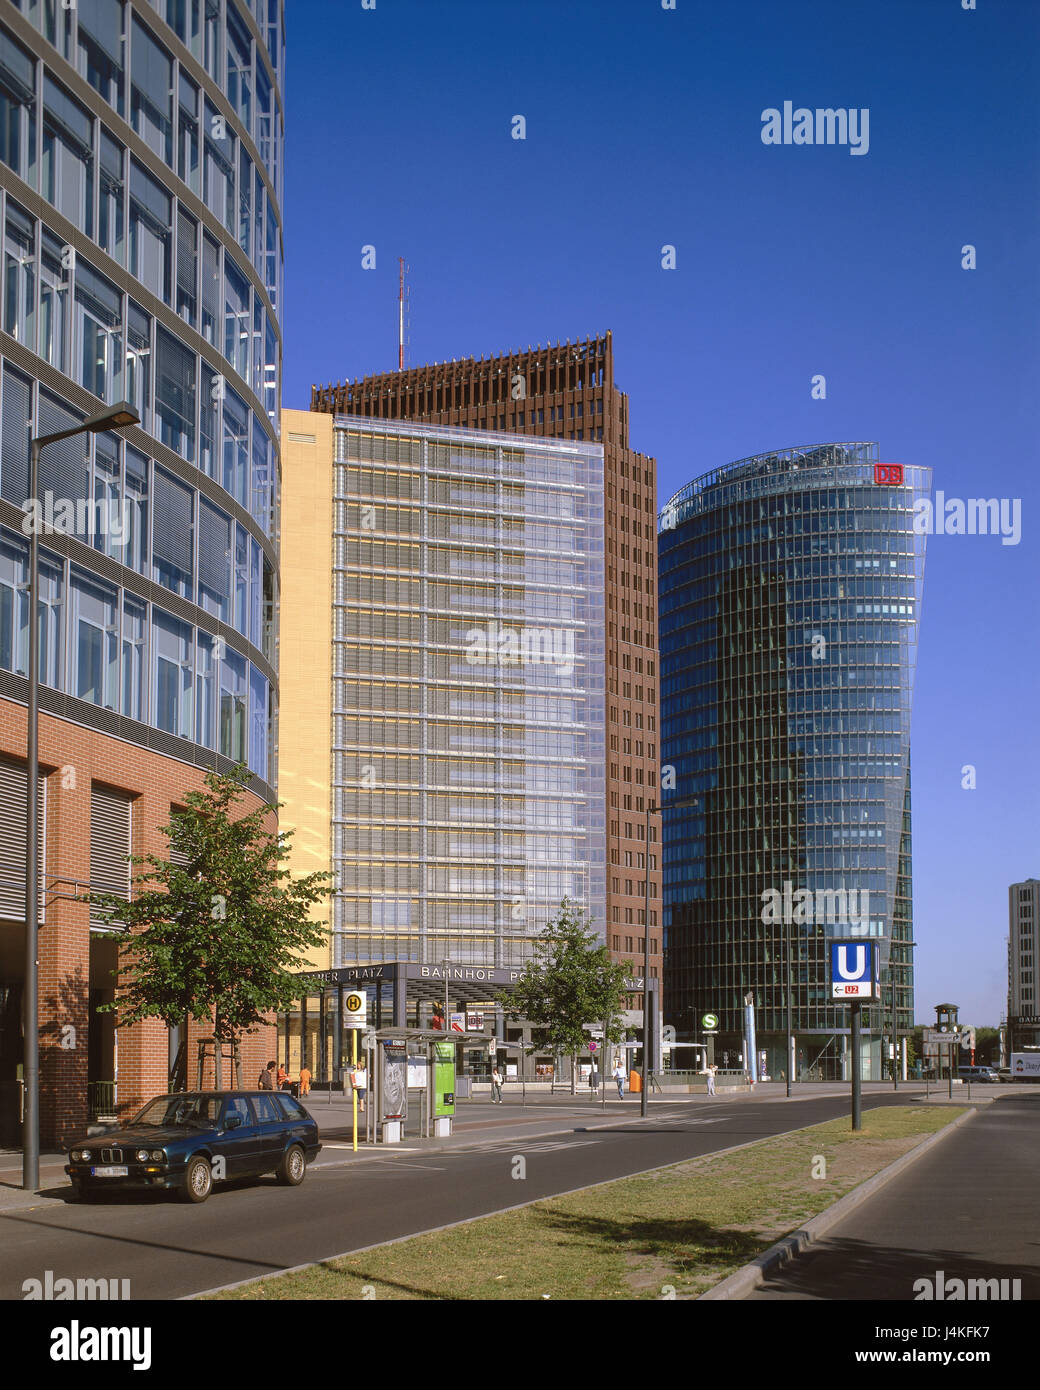 Germany, Berlin, Potsdam square, office building, Kollhoff tower, German Railways Tower, underground stop Europe, town, city, capital, part of town, architect from the left: Renzo Piano, Hans Kollhoff, Helmut Jahn, office building, high rises, architecture, building Stock Photo